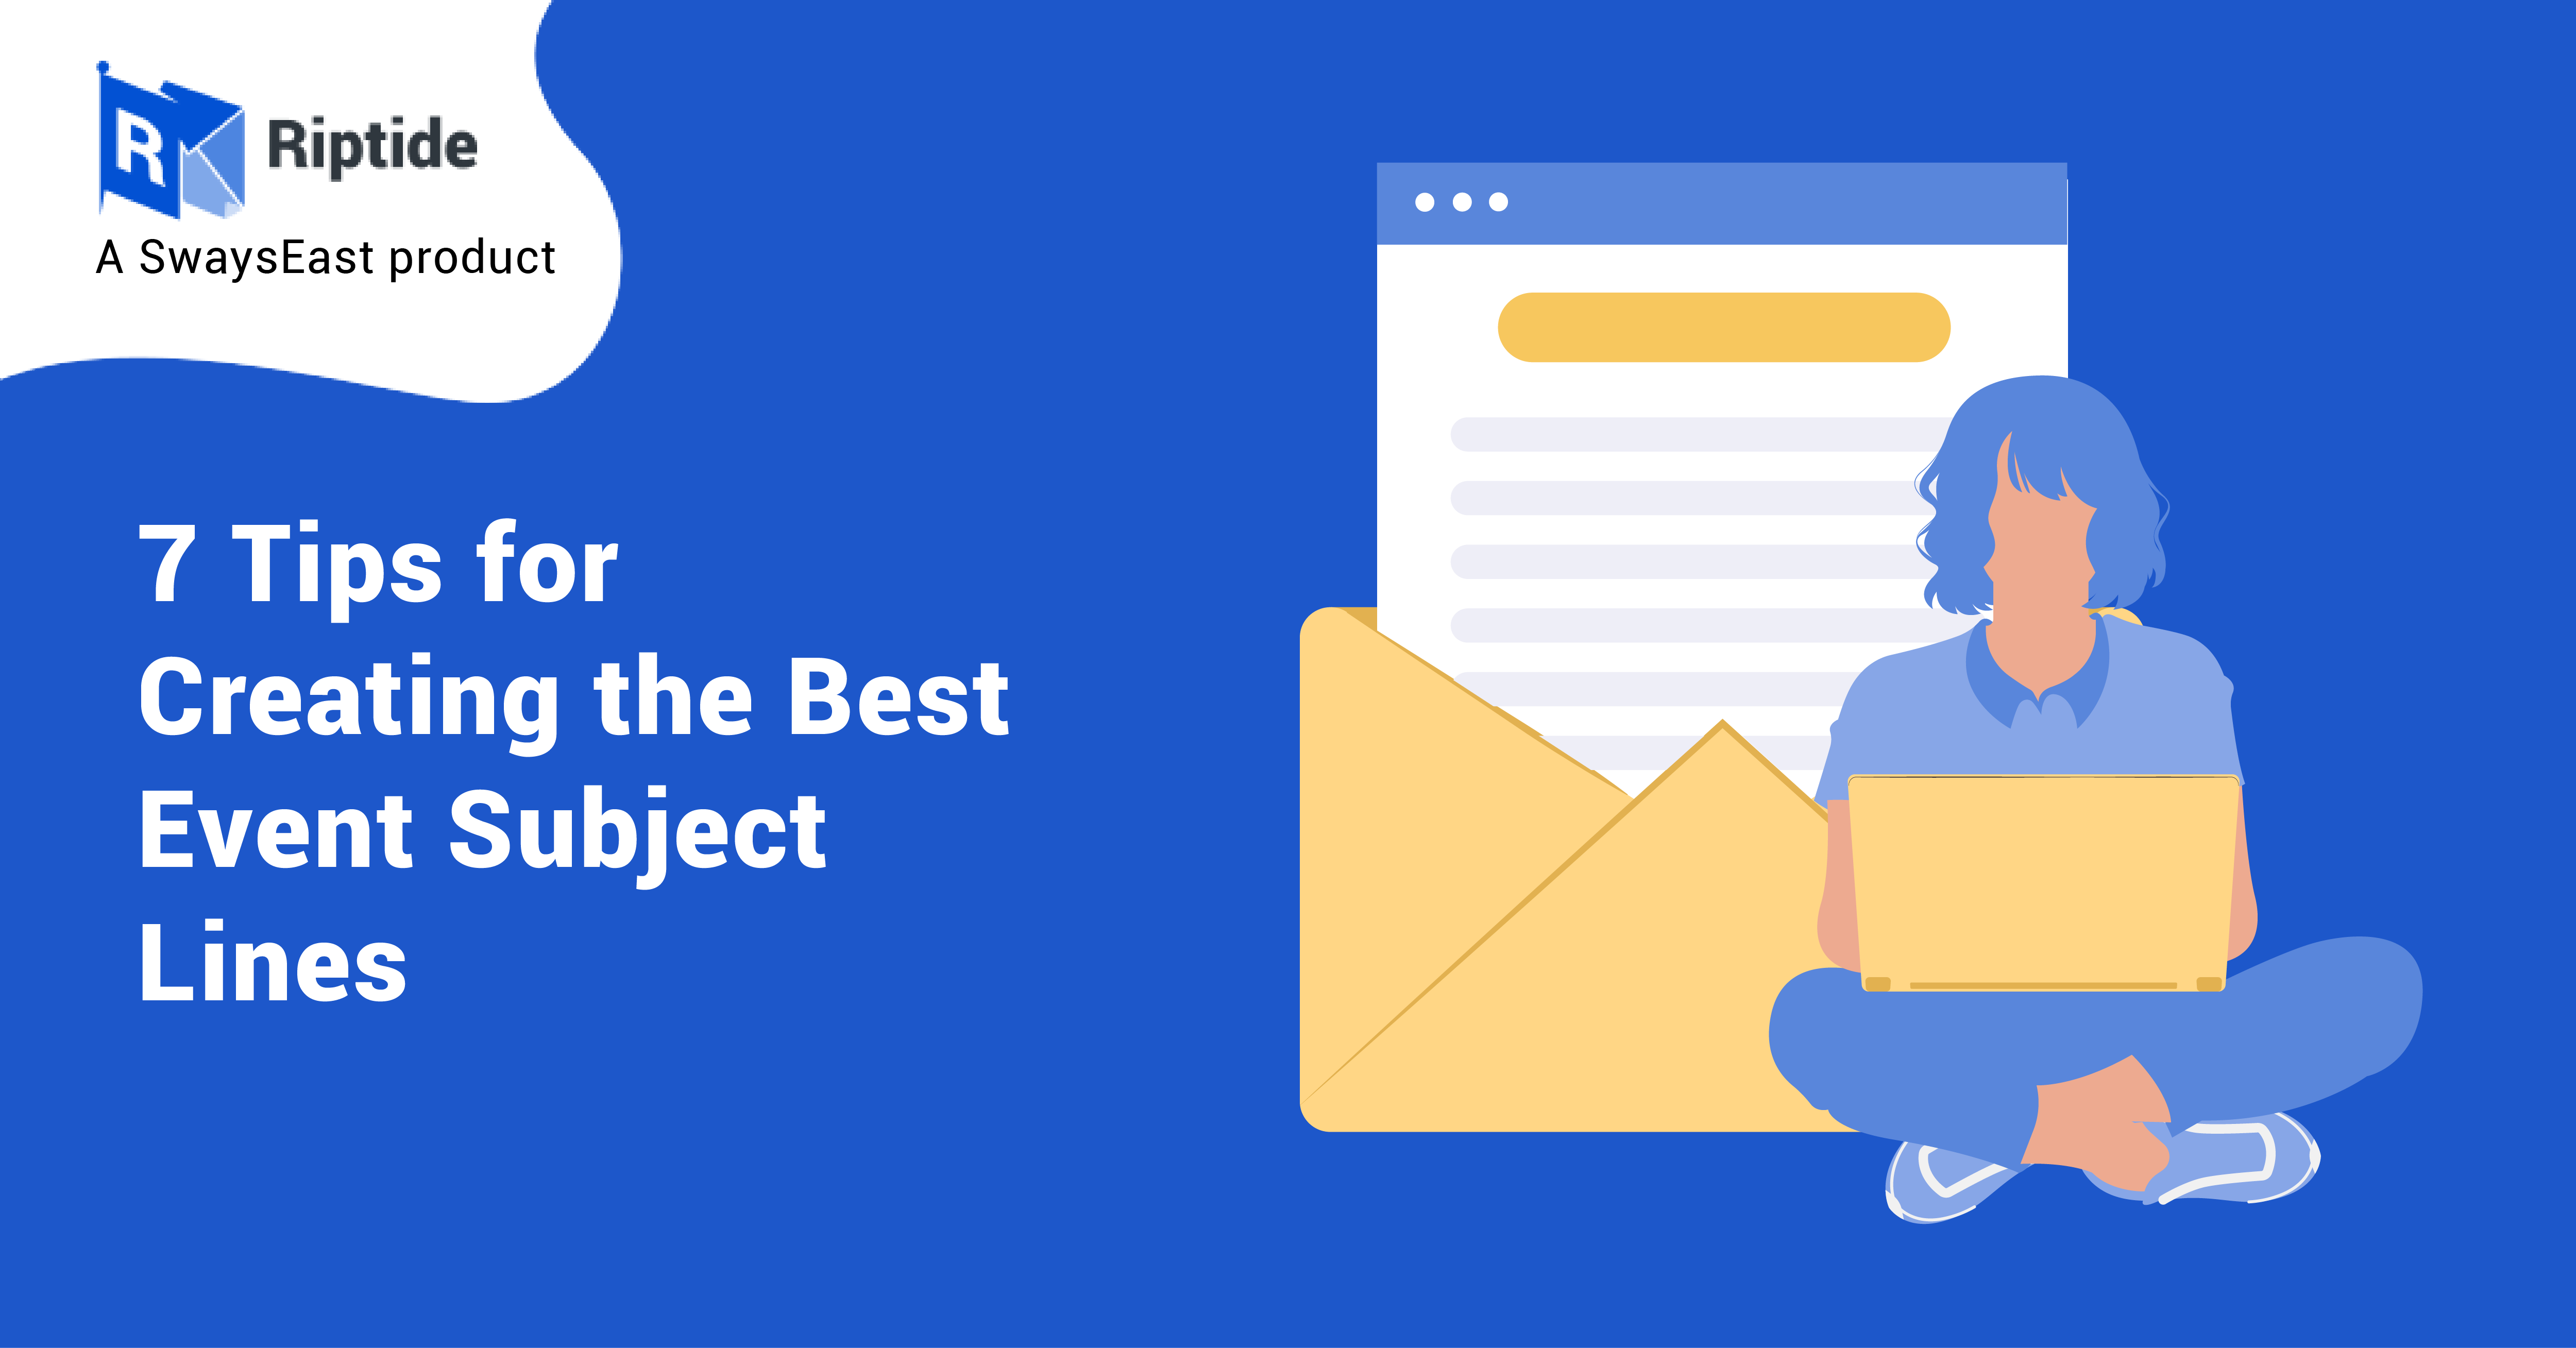 7 Tips for Creating the Best Event Subject Lines